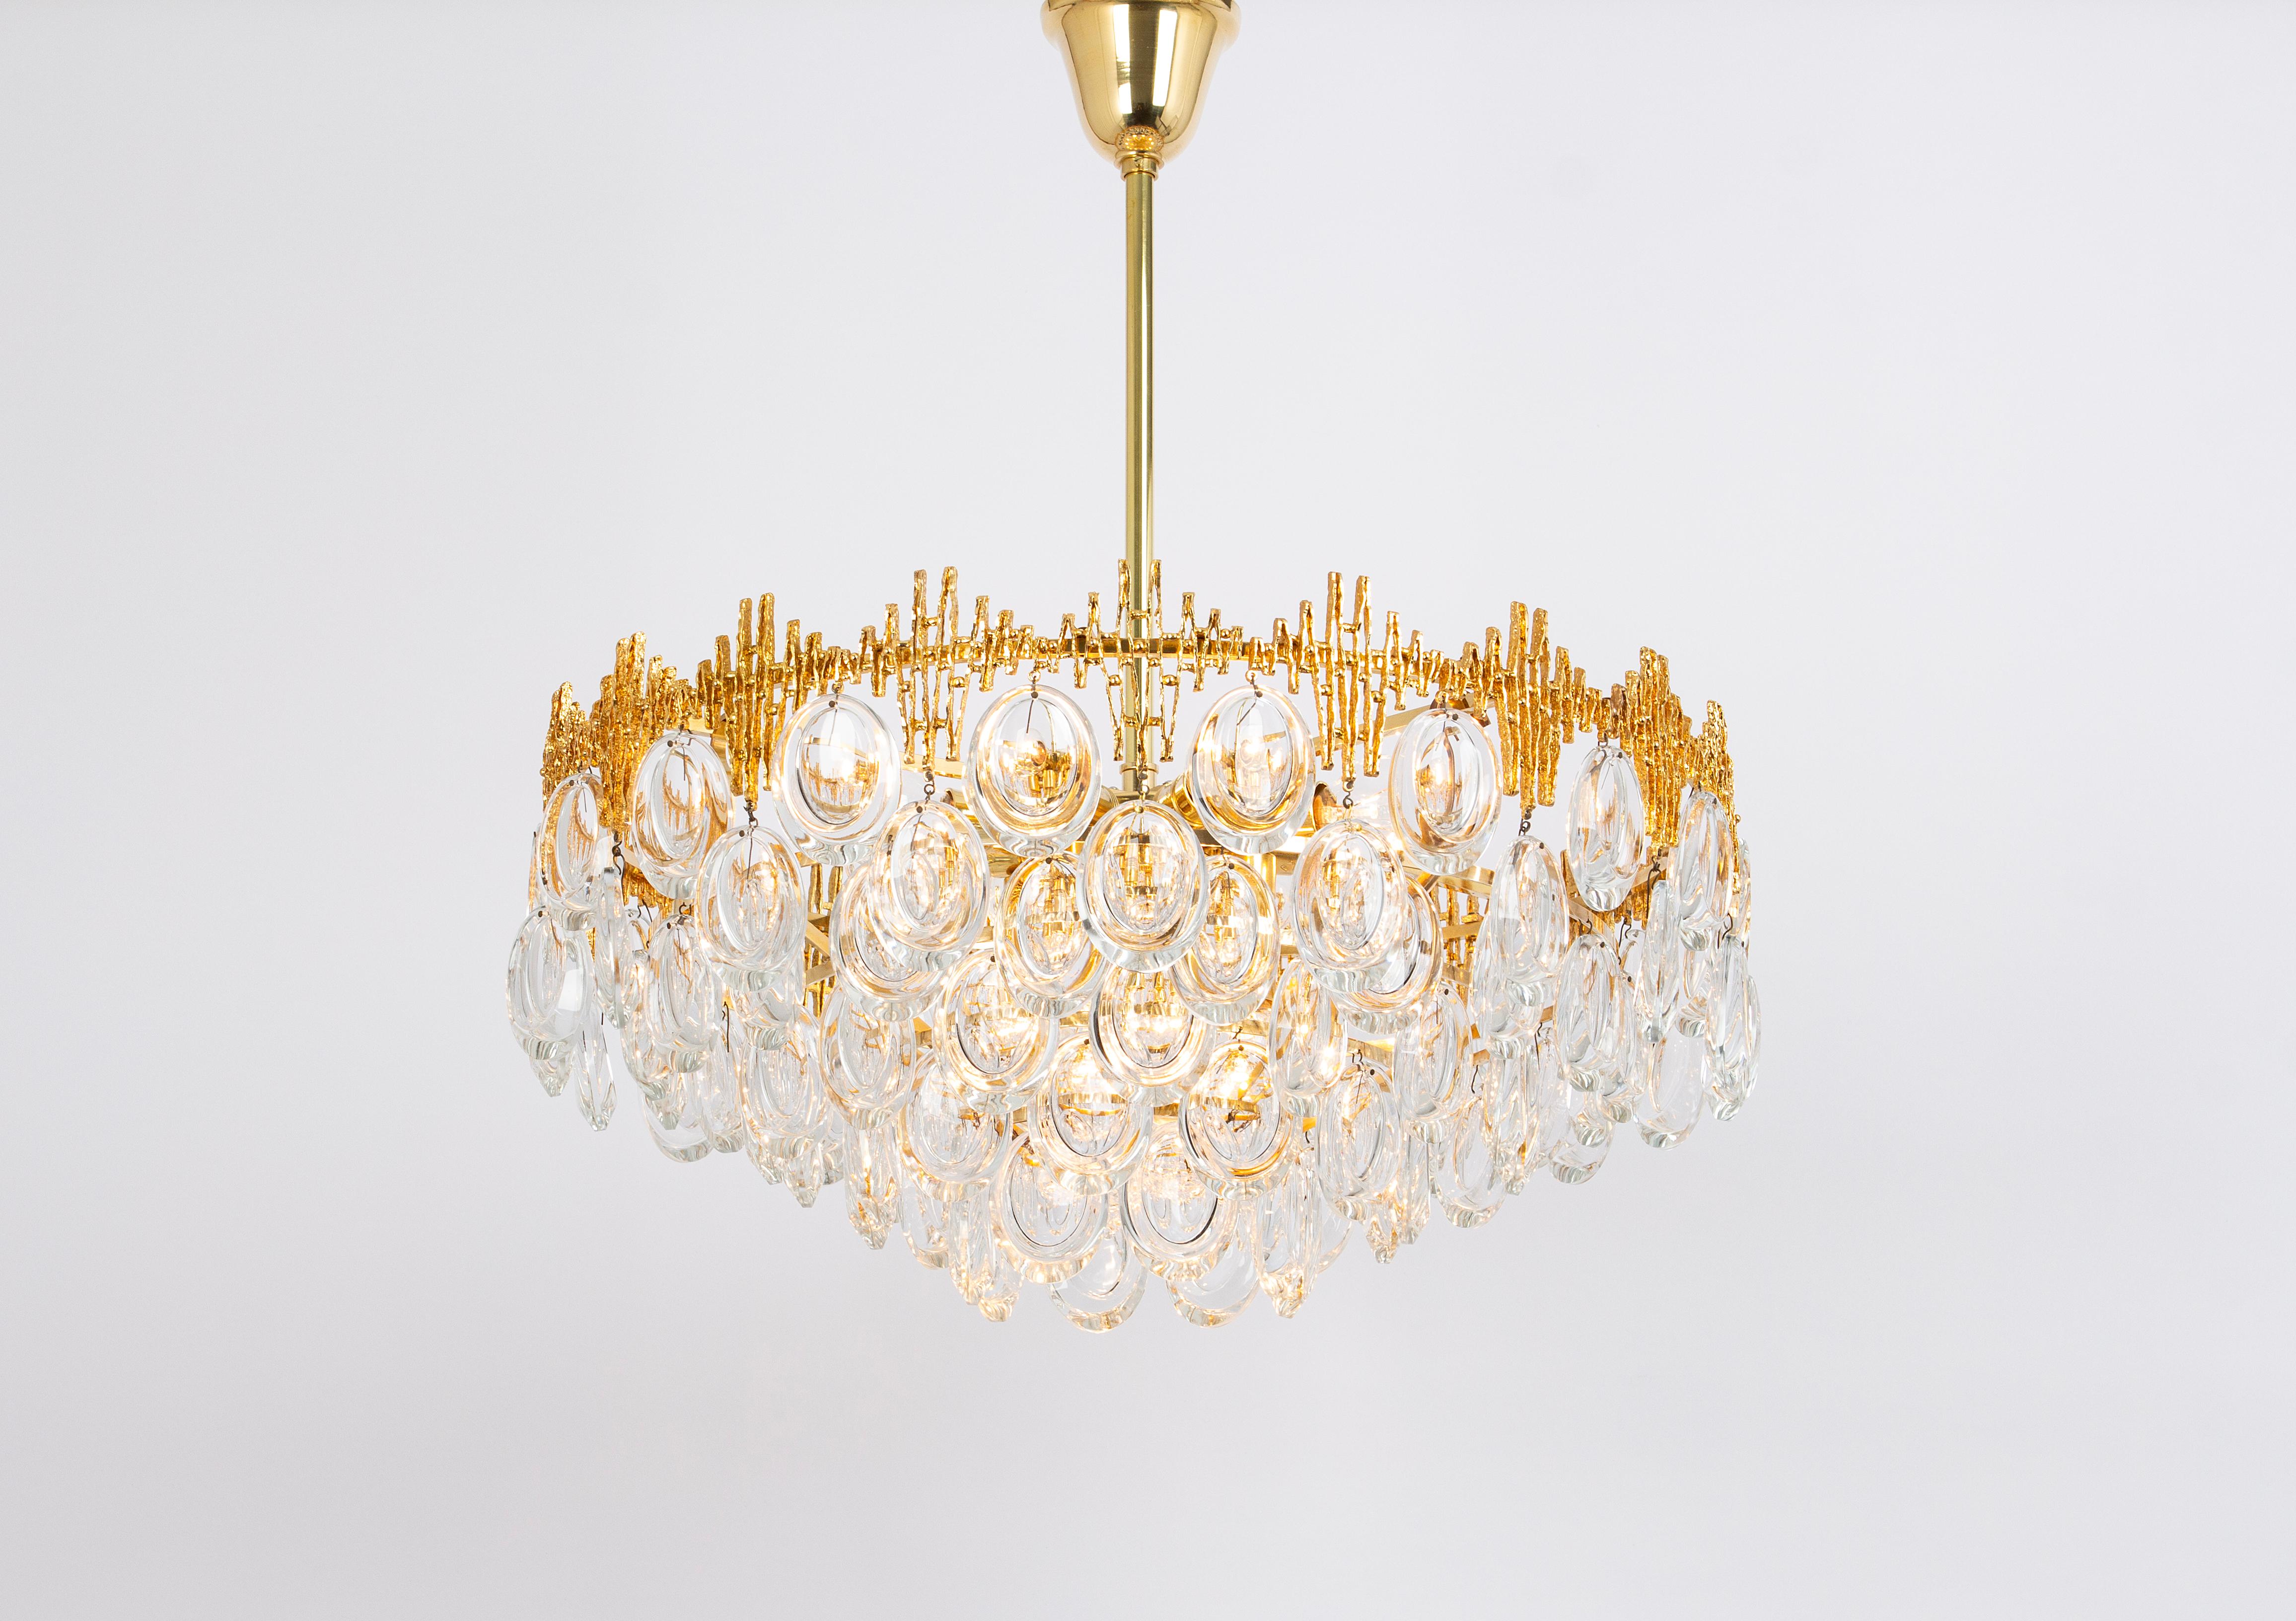 Gold Plate Stunning Large Brass and Crystal Chandelier, by Palwa, Germany, 1970s For Sale